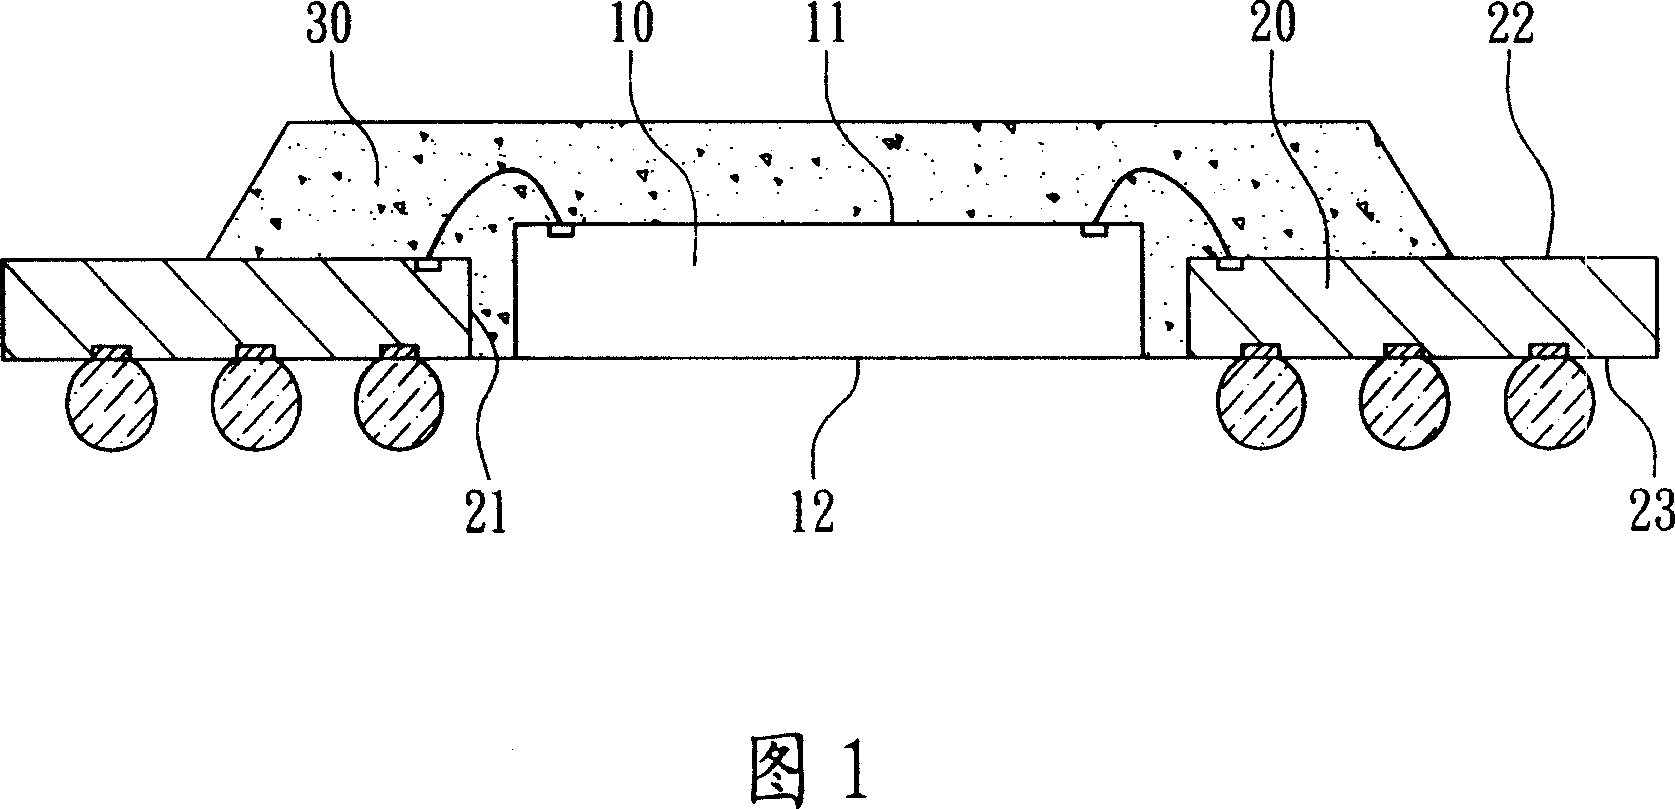 Thin packing structure for enhancing crystal fin radiation